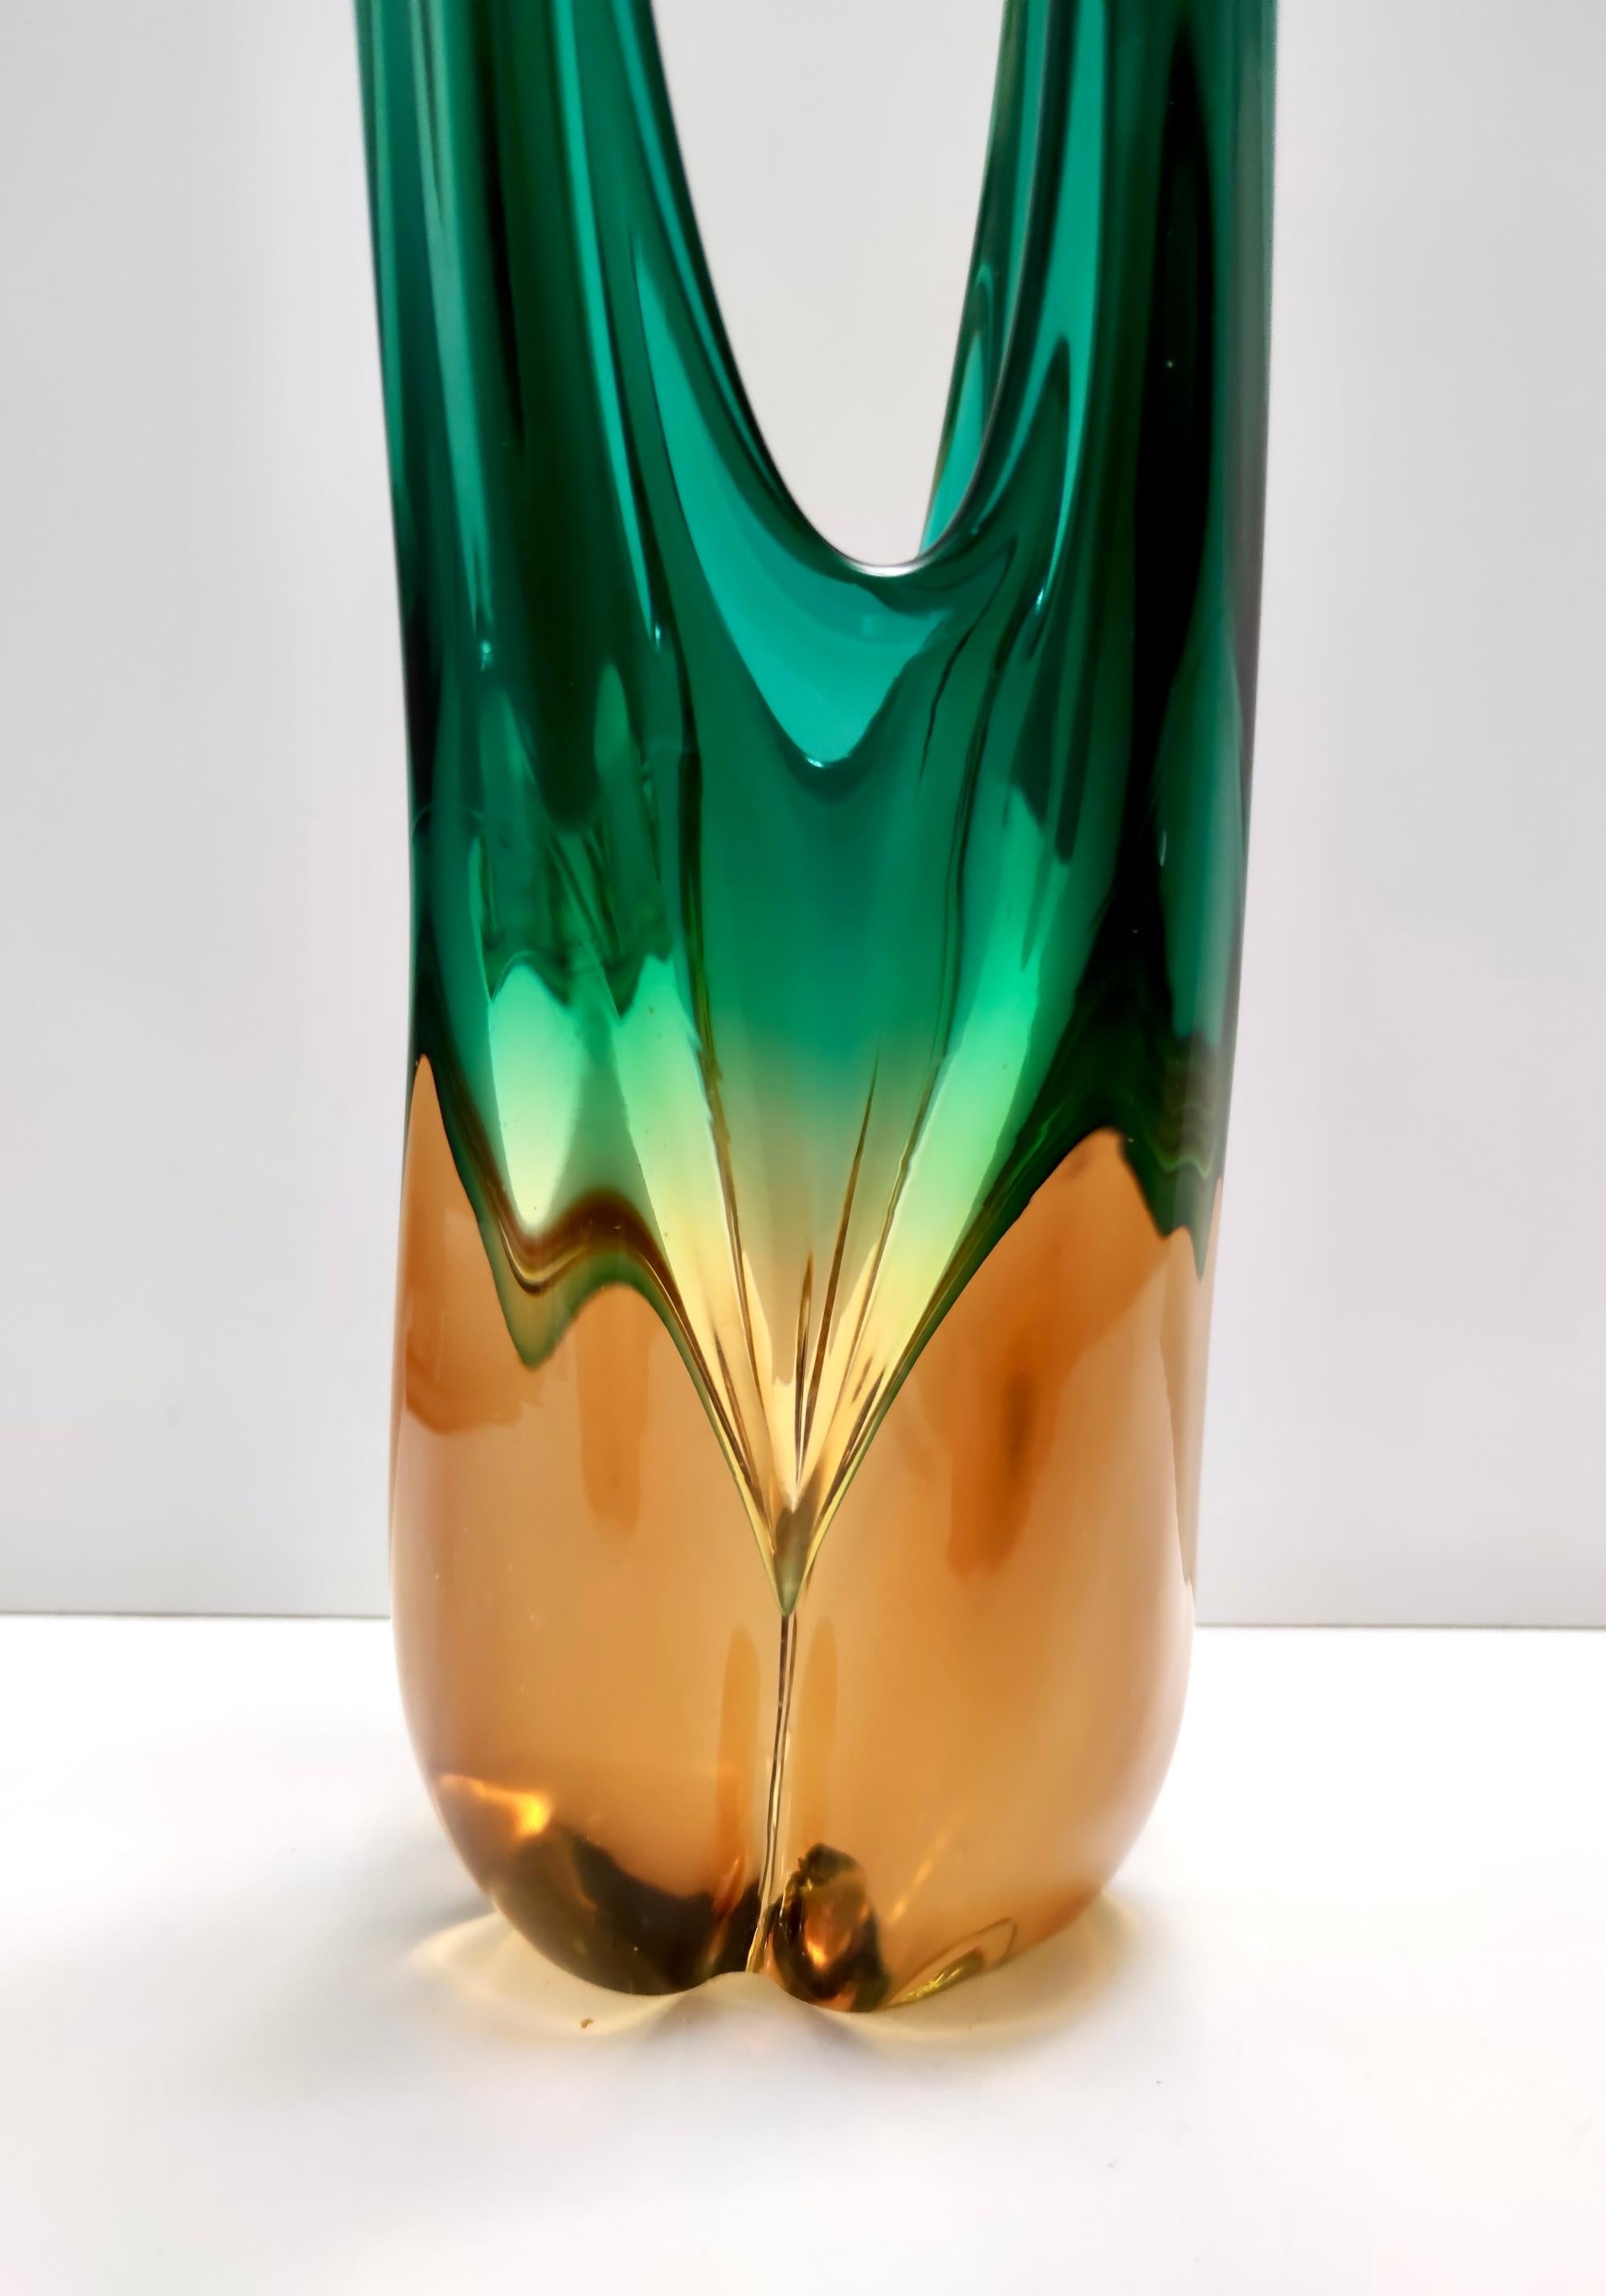 Stunning Vintage Green and Amber Murano Glass Centrepiece Vase, Italy For Sale 5